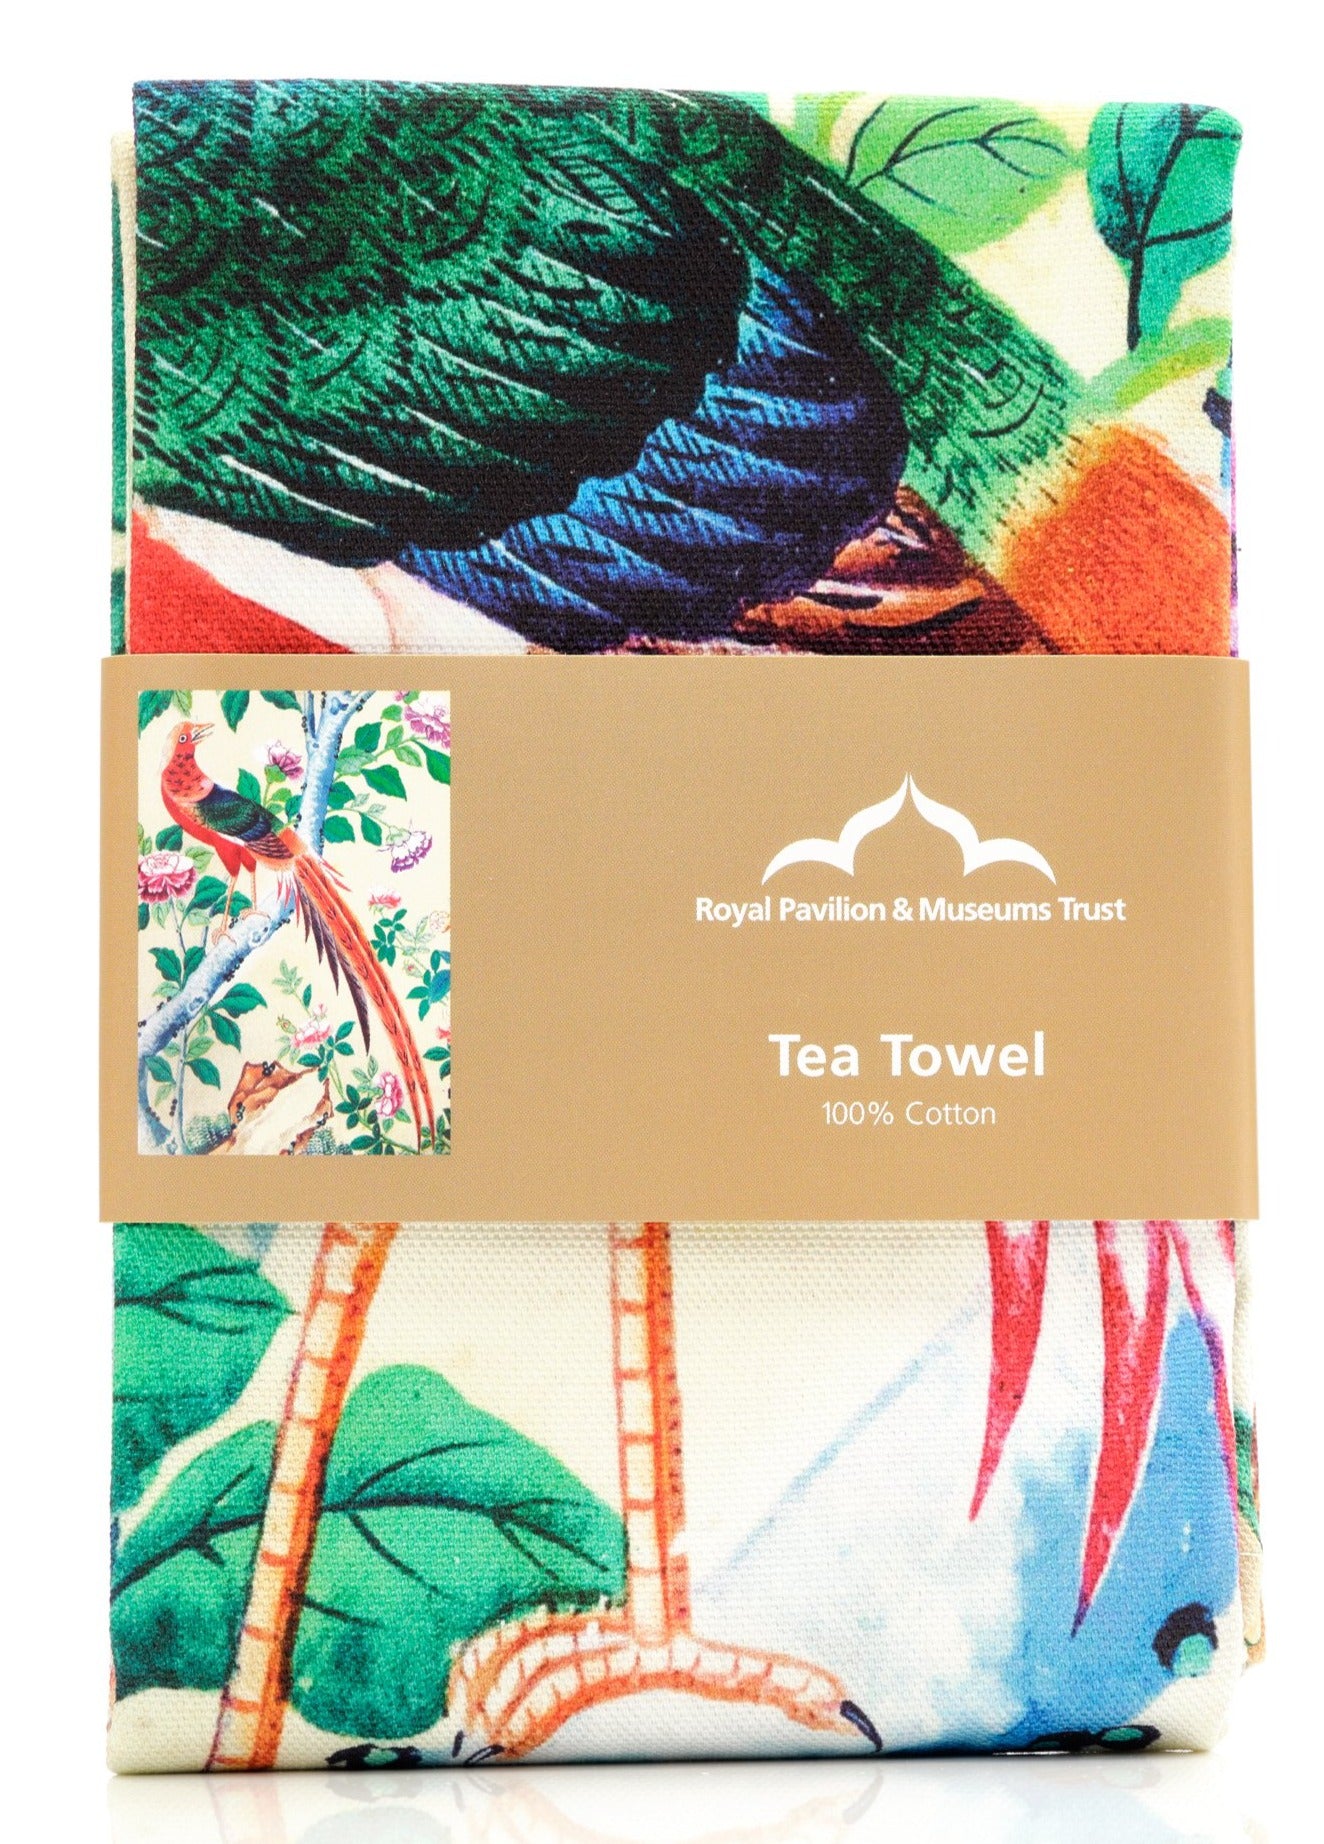 A folded and packaged tea towel.